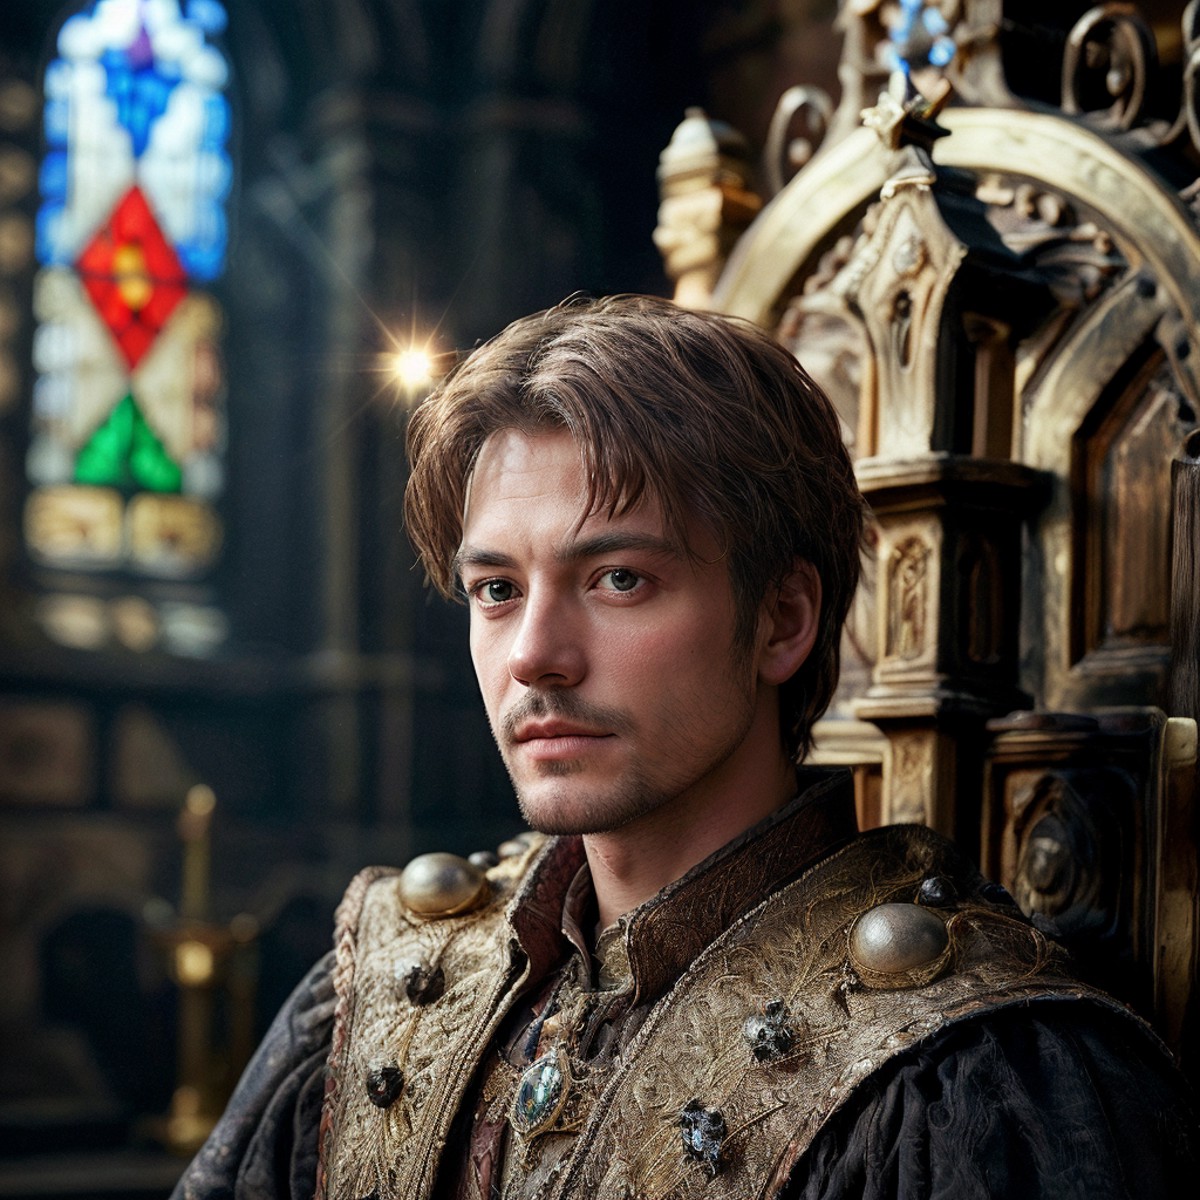 highly detailed horro photo of (rpgroyalty:1.0) in a medieval throne room,

jewelry, crown, manly, facial hair,
walking th...